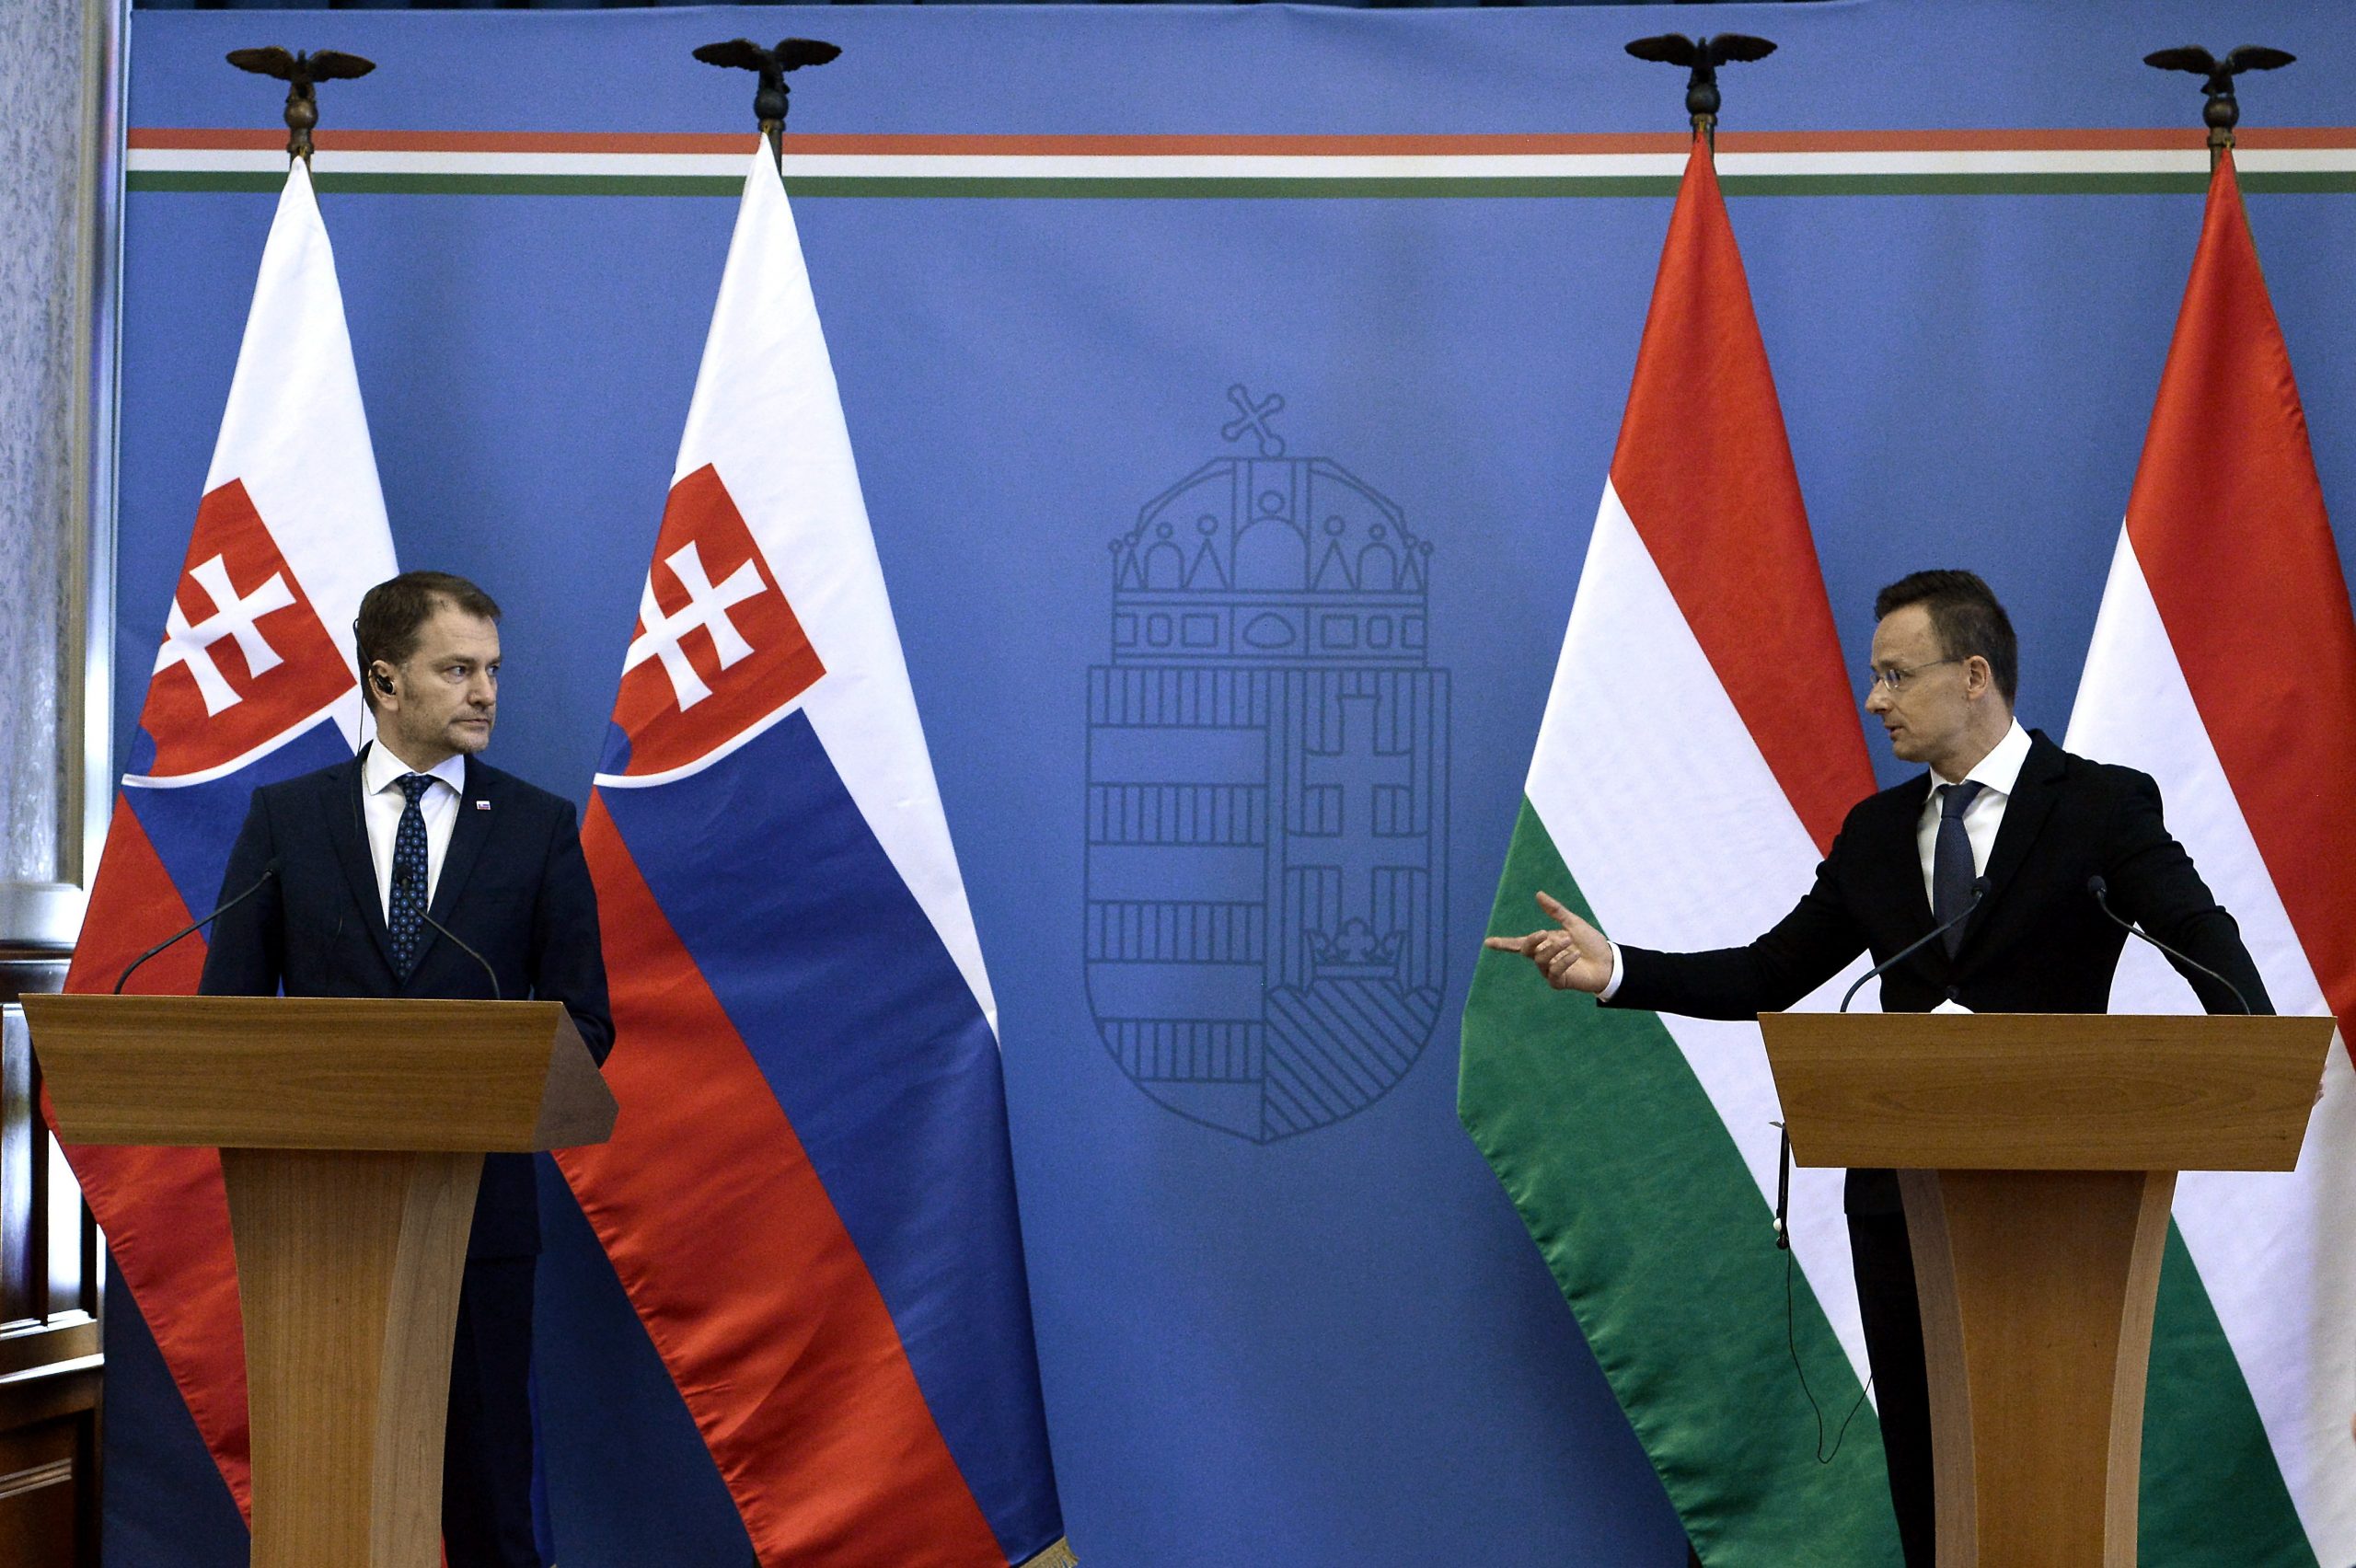 Hungary to Help Slovakia Test Sputnik V After Licensing Controversy